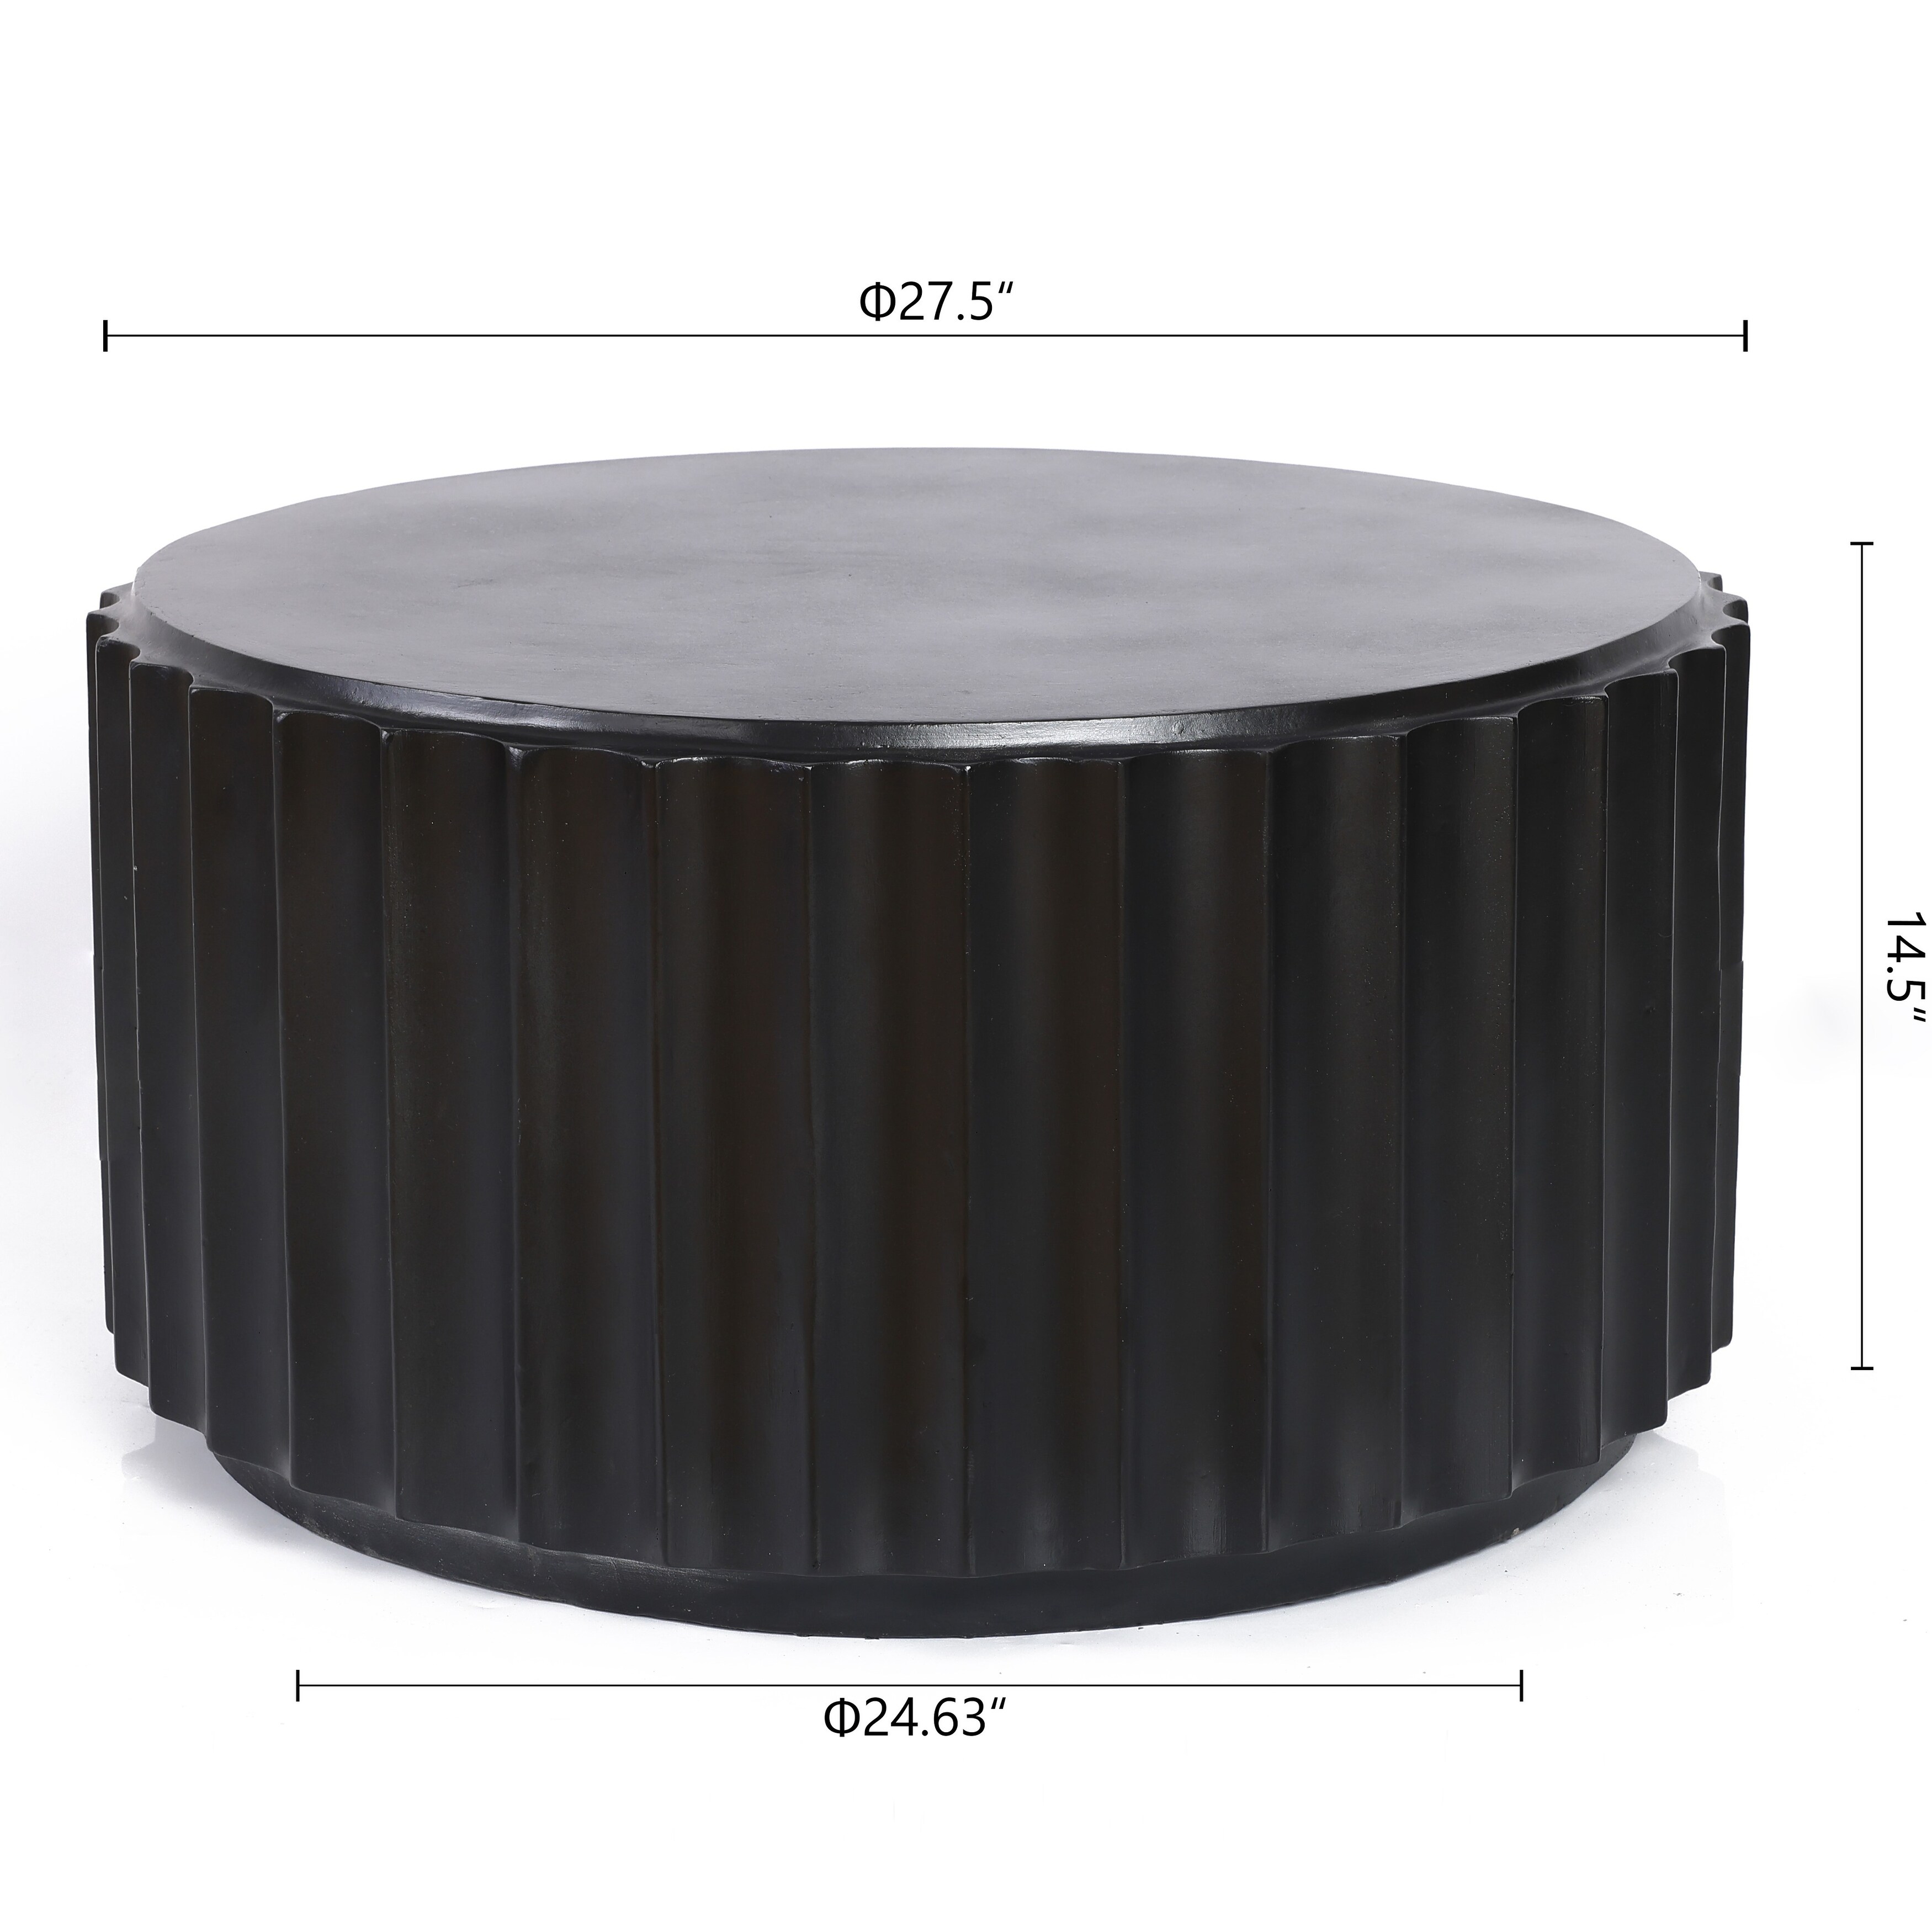 Black Cement Round Coffee Table for Indoor or Outdoor - 27.5" Diameter